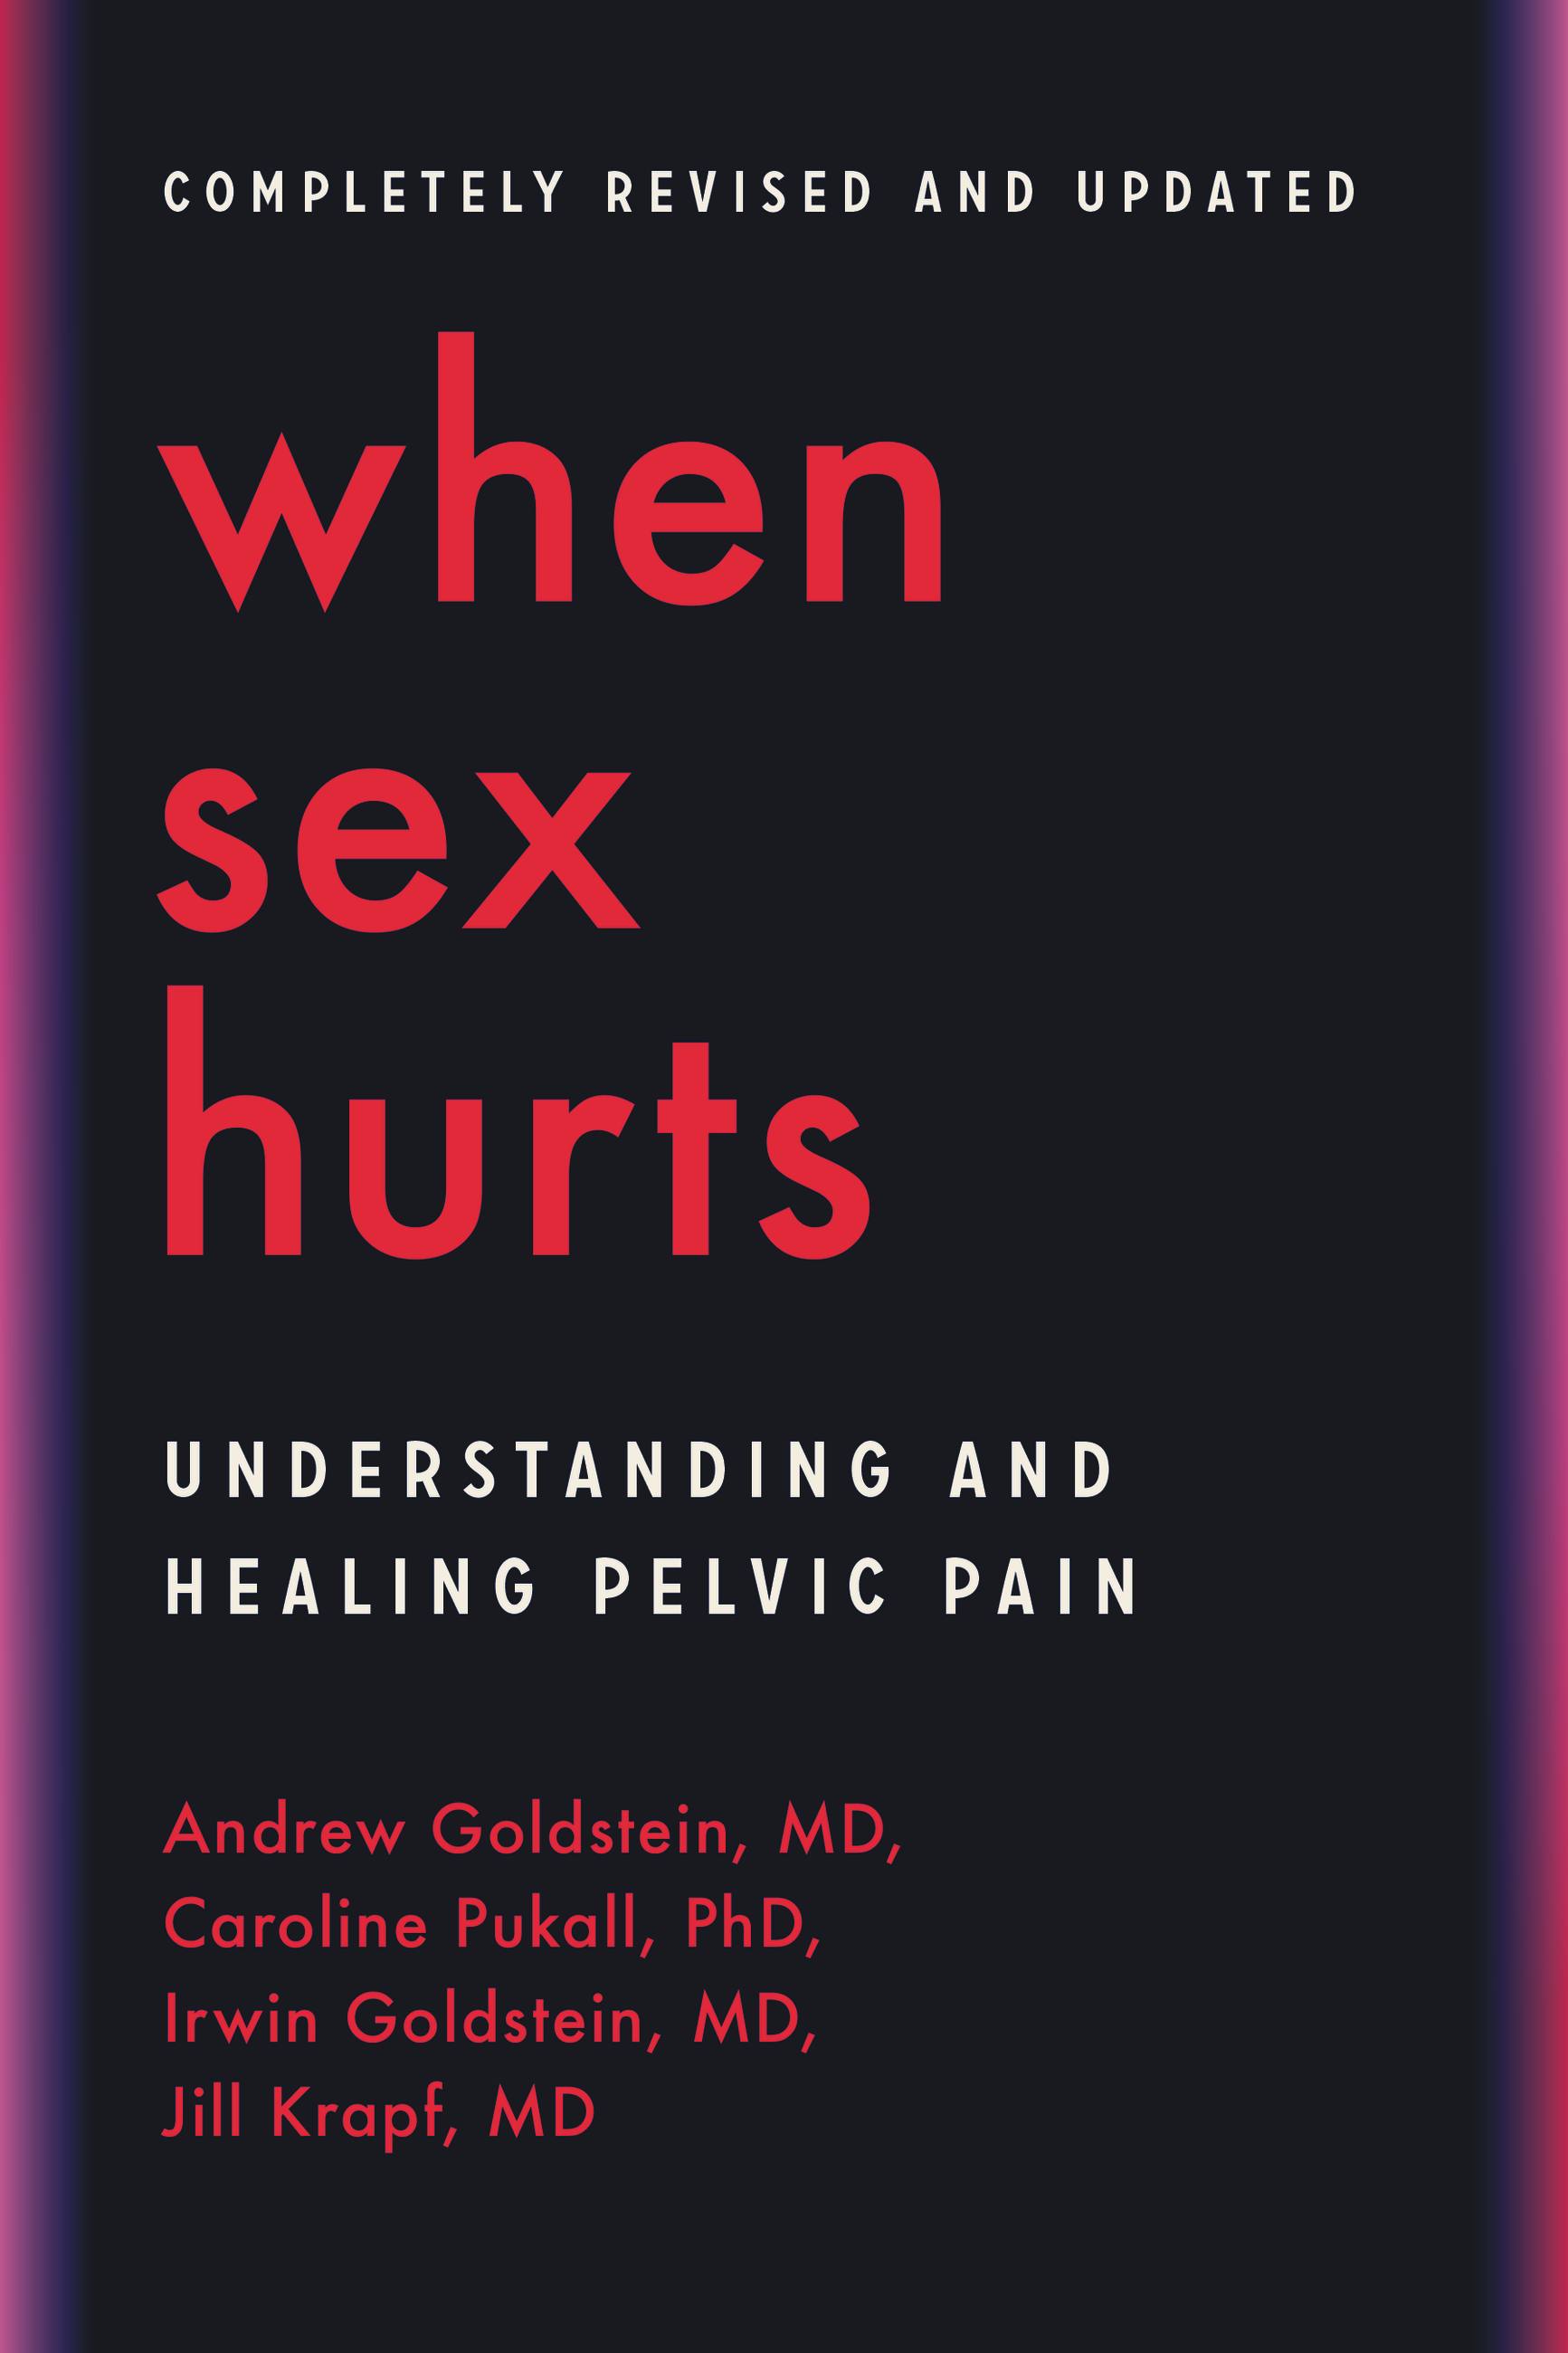 When Sex Hurts by Andrew Goldstein, MD Hachette Book Group pic